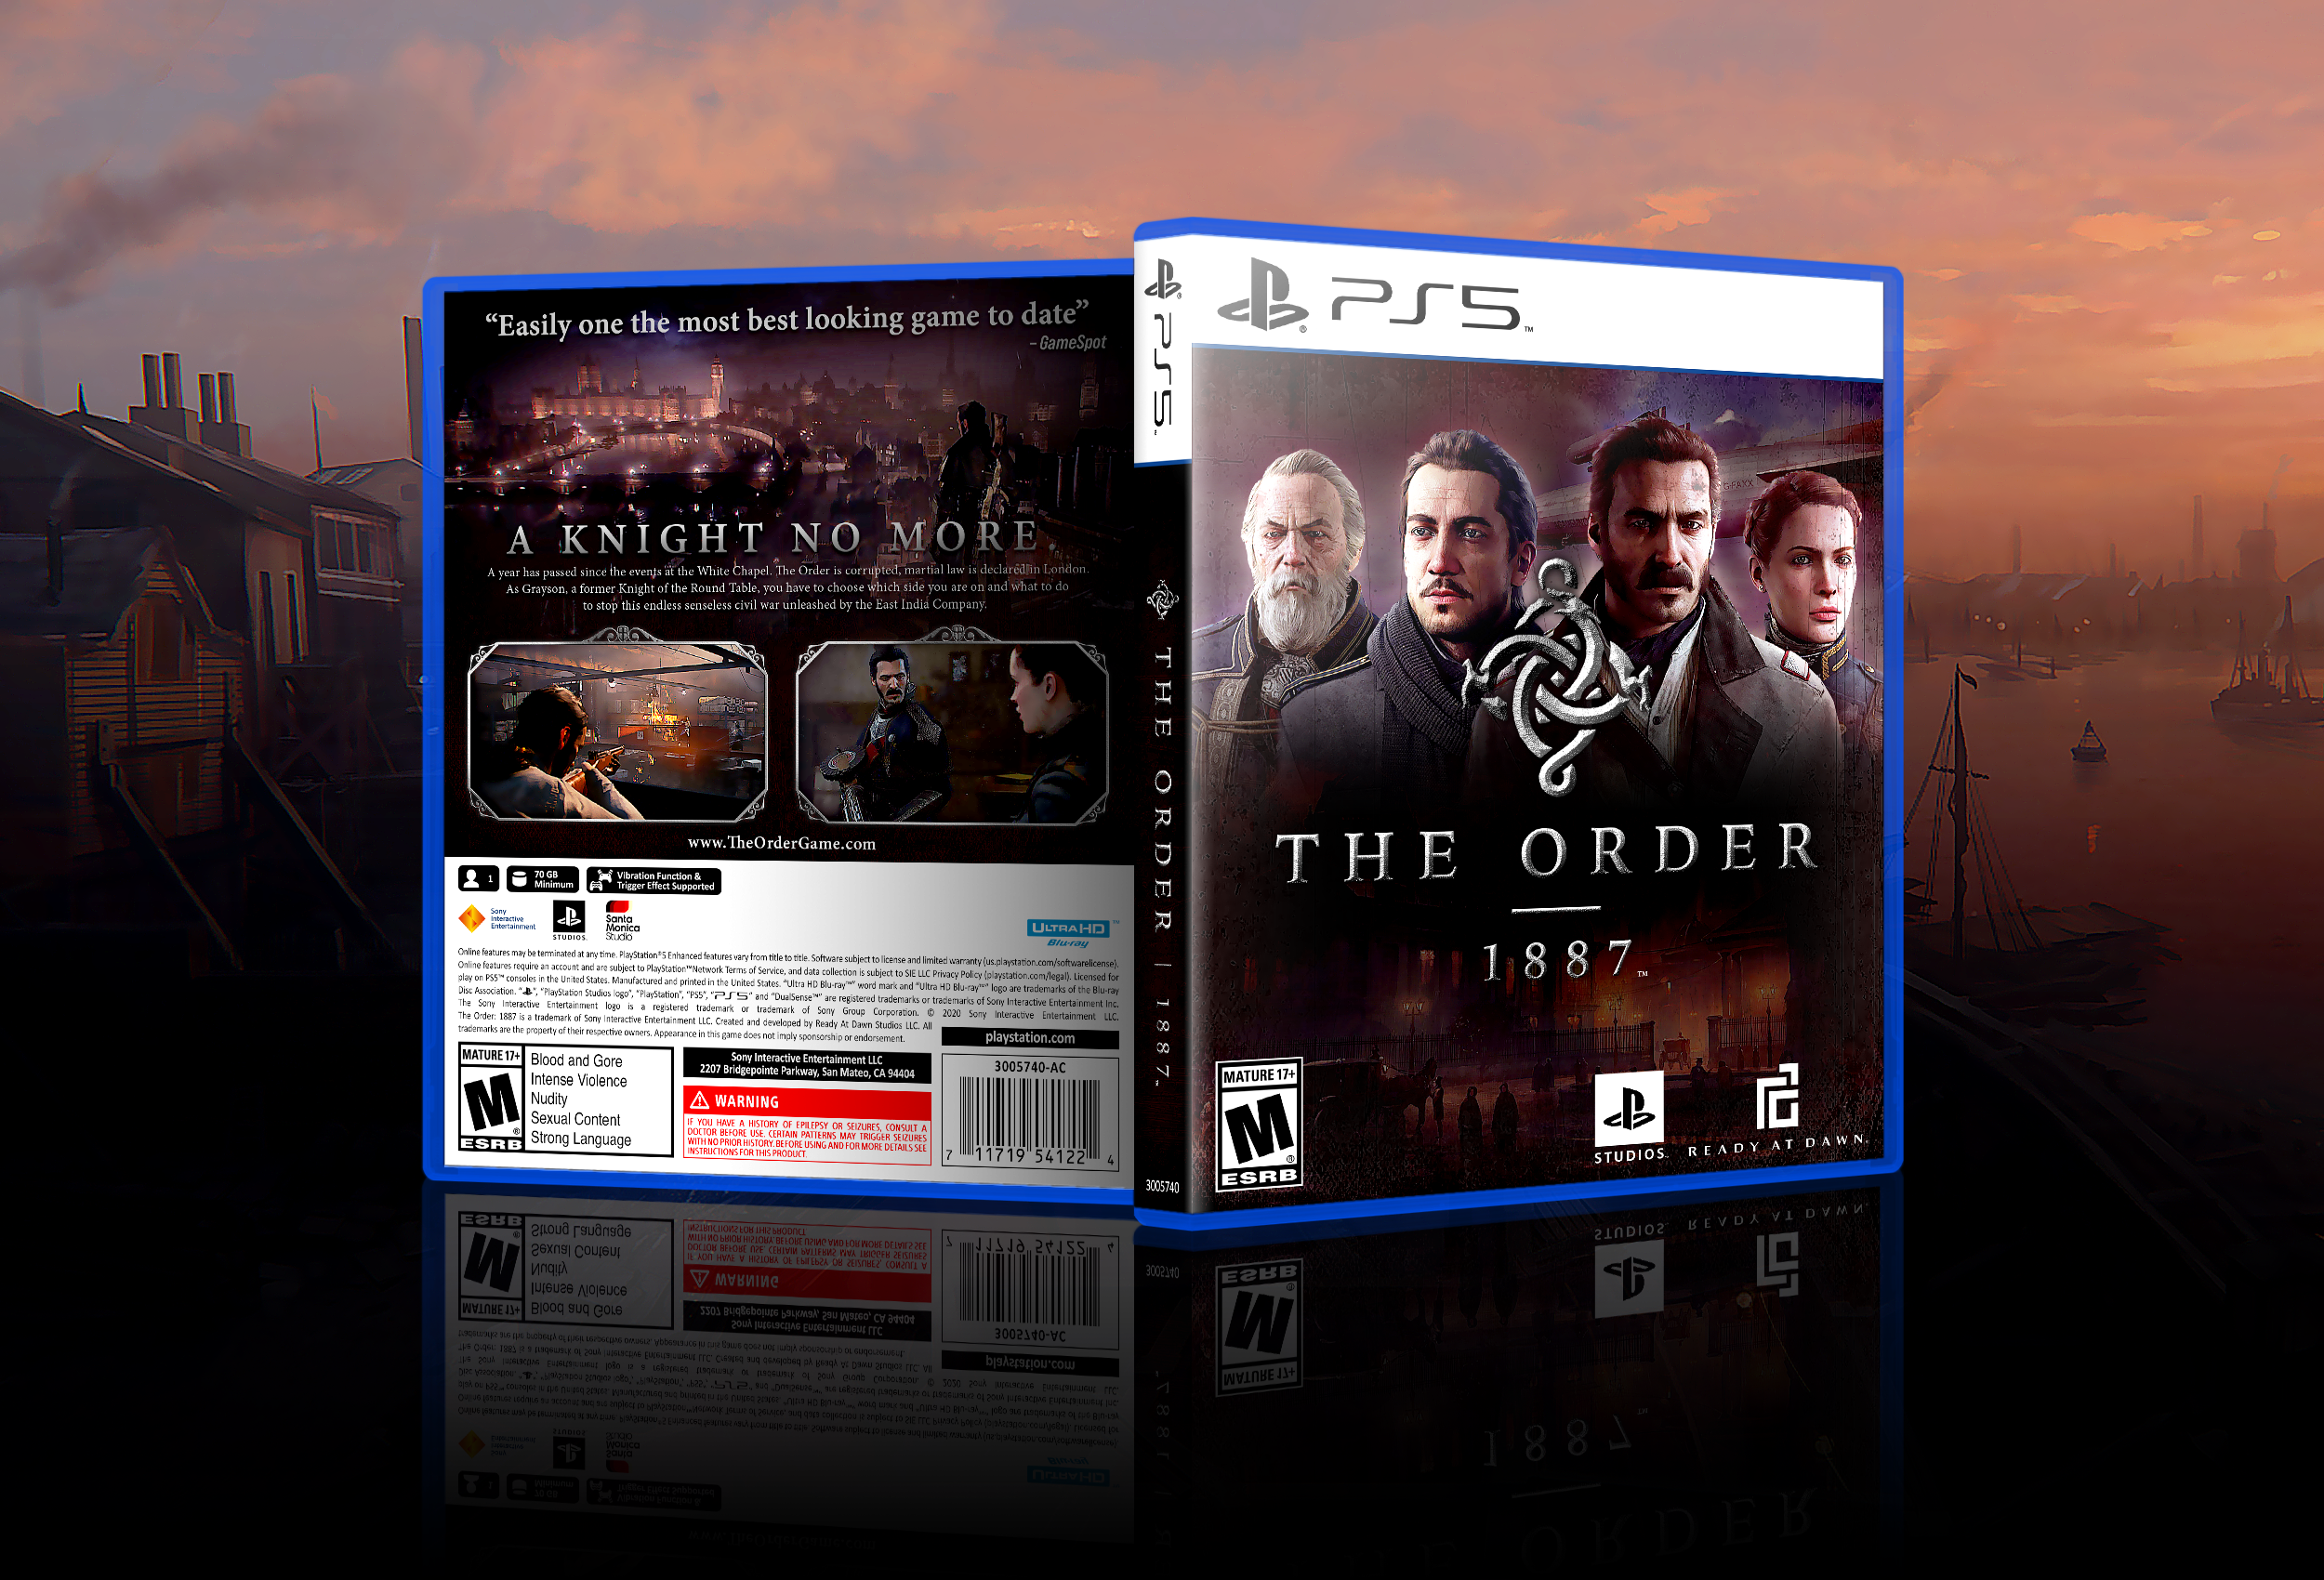 The Order: 1887 box cover